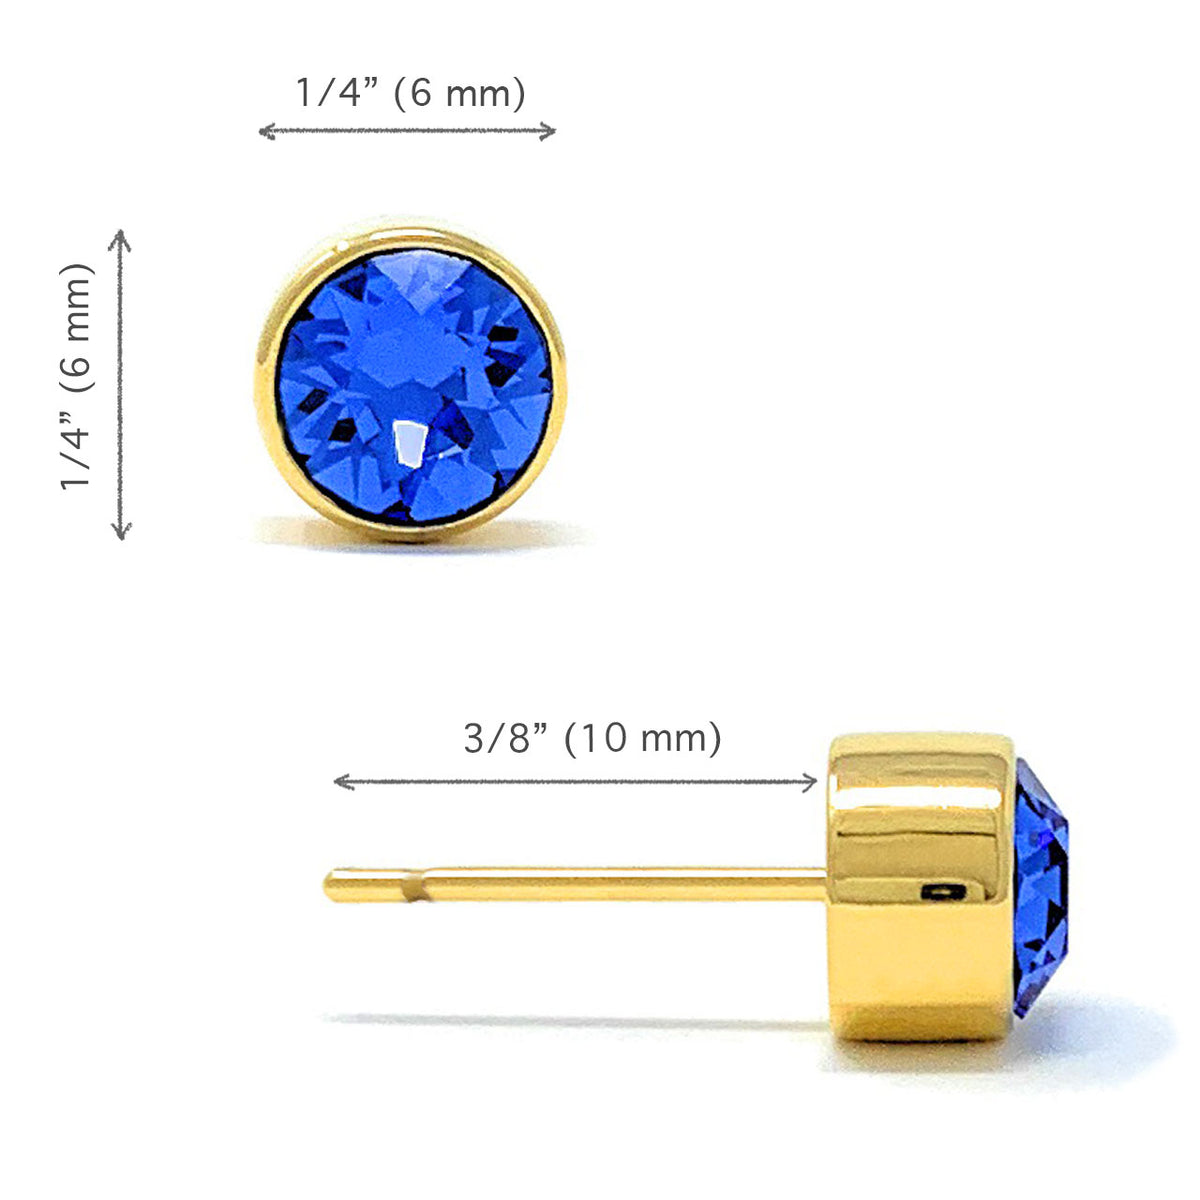 Harley Small Stud Earrings with Blue Sapphire Round Crystals from Swarovski Gold Plated - Ed Heart